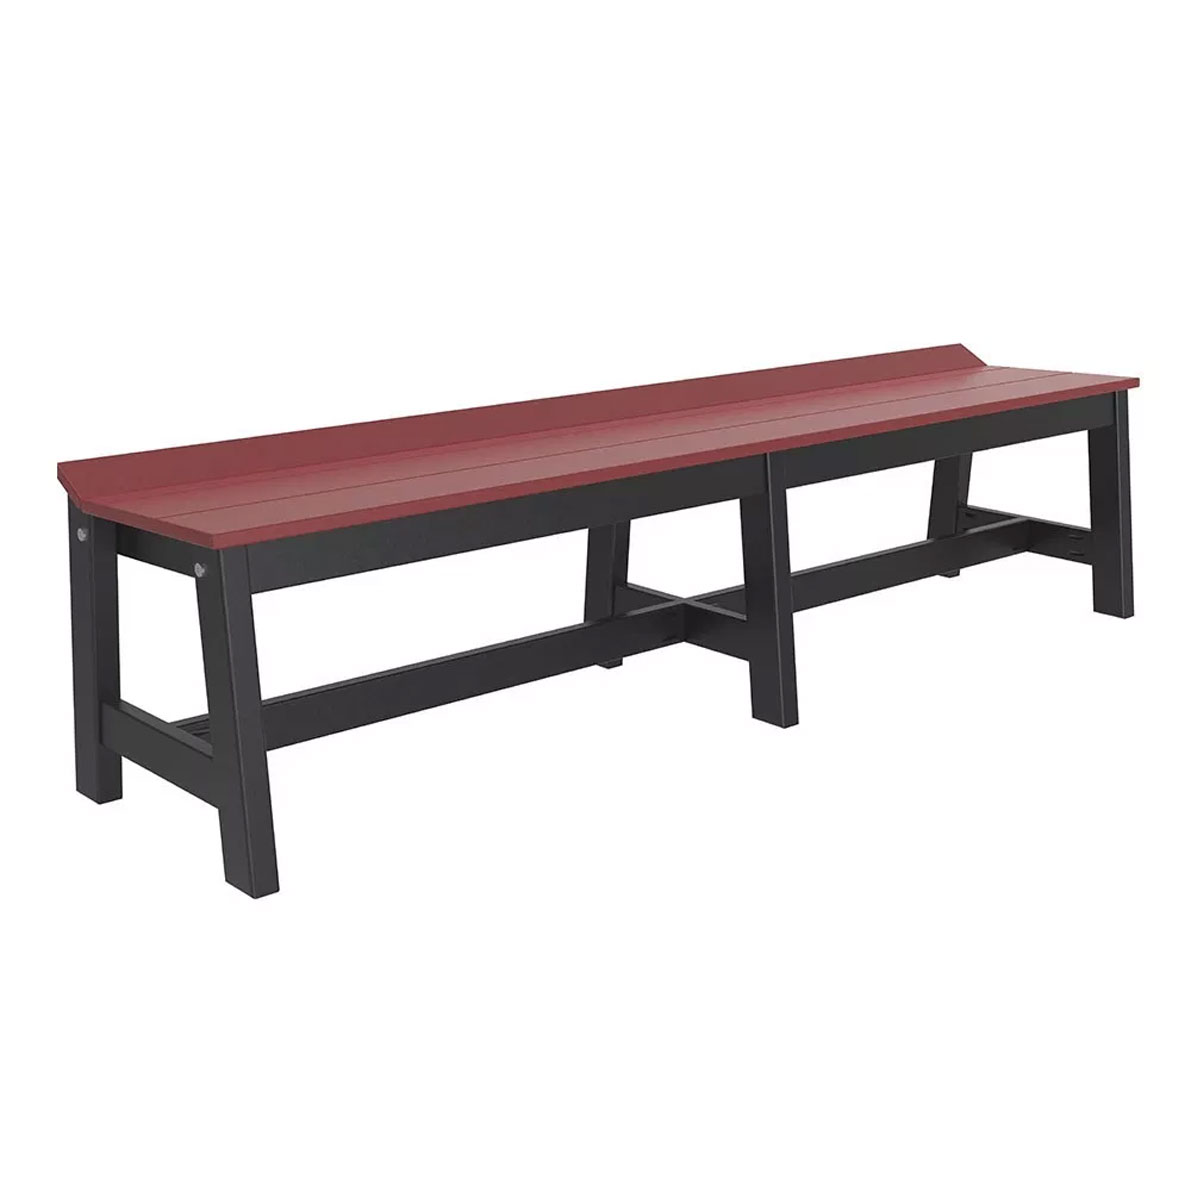 72 inch Cafe Dining Bench